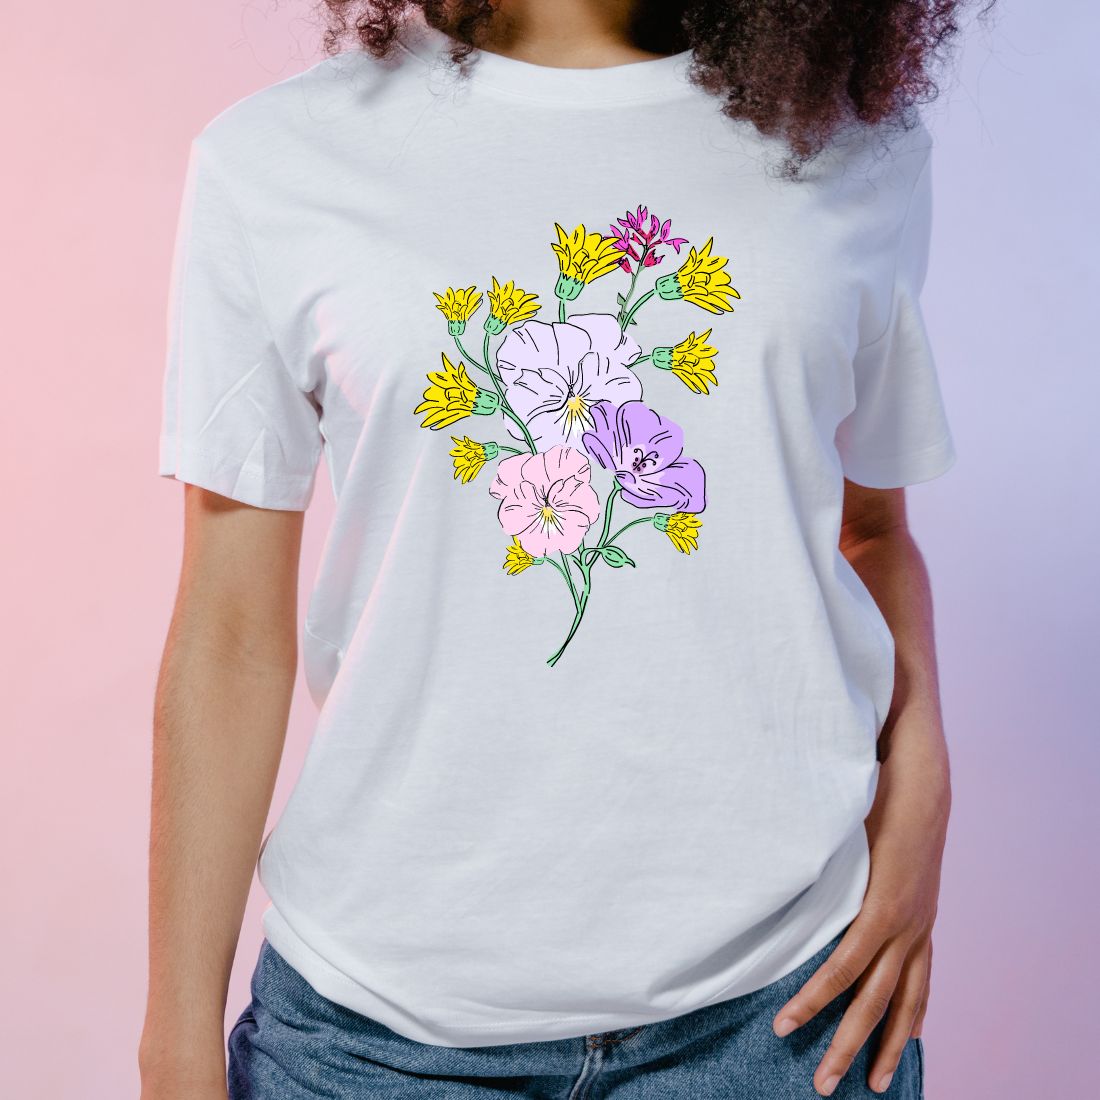 Flowers T Shirt Design cover image.